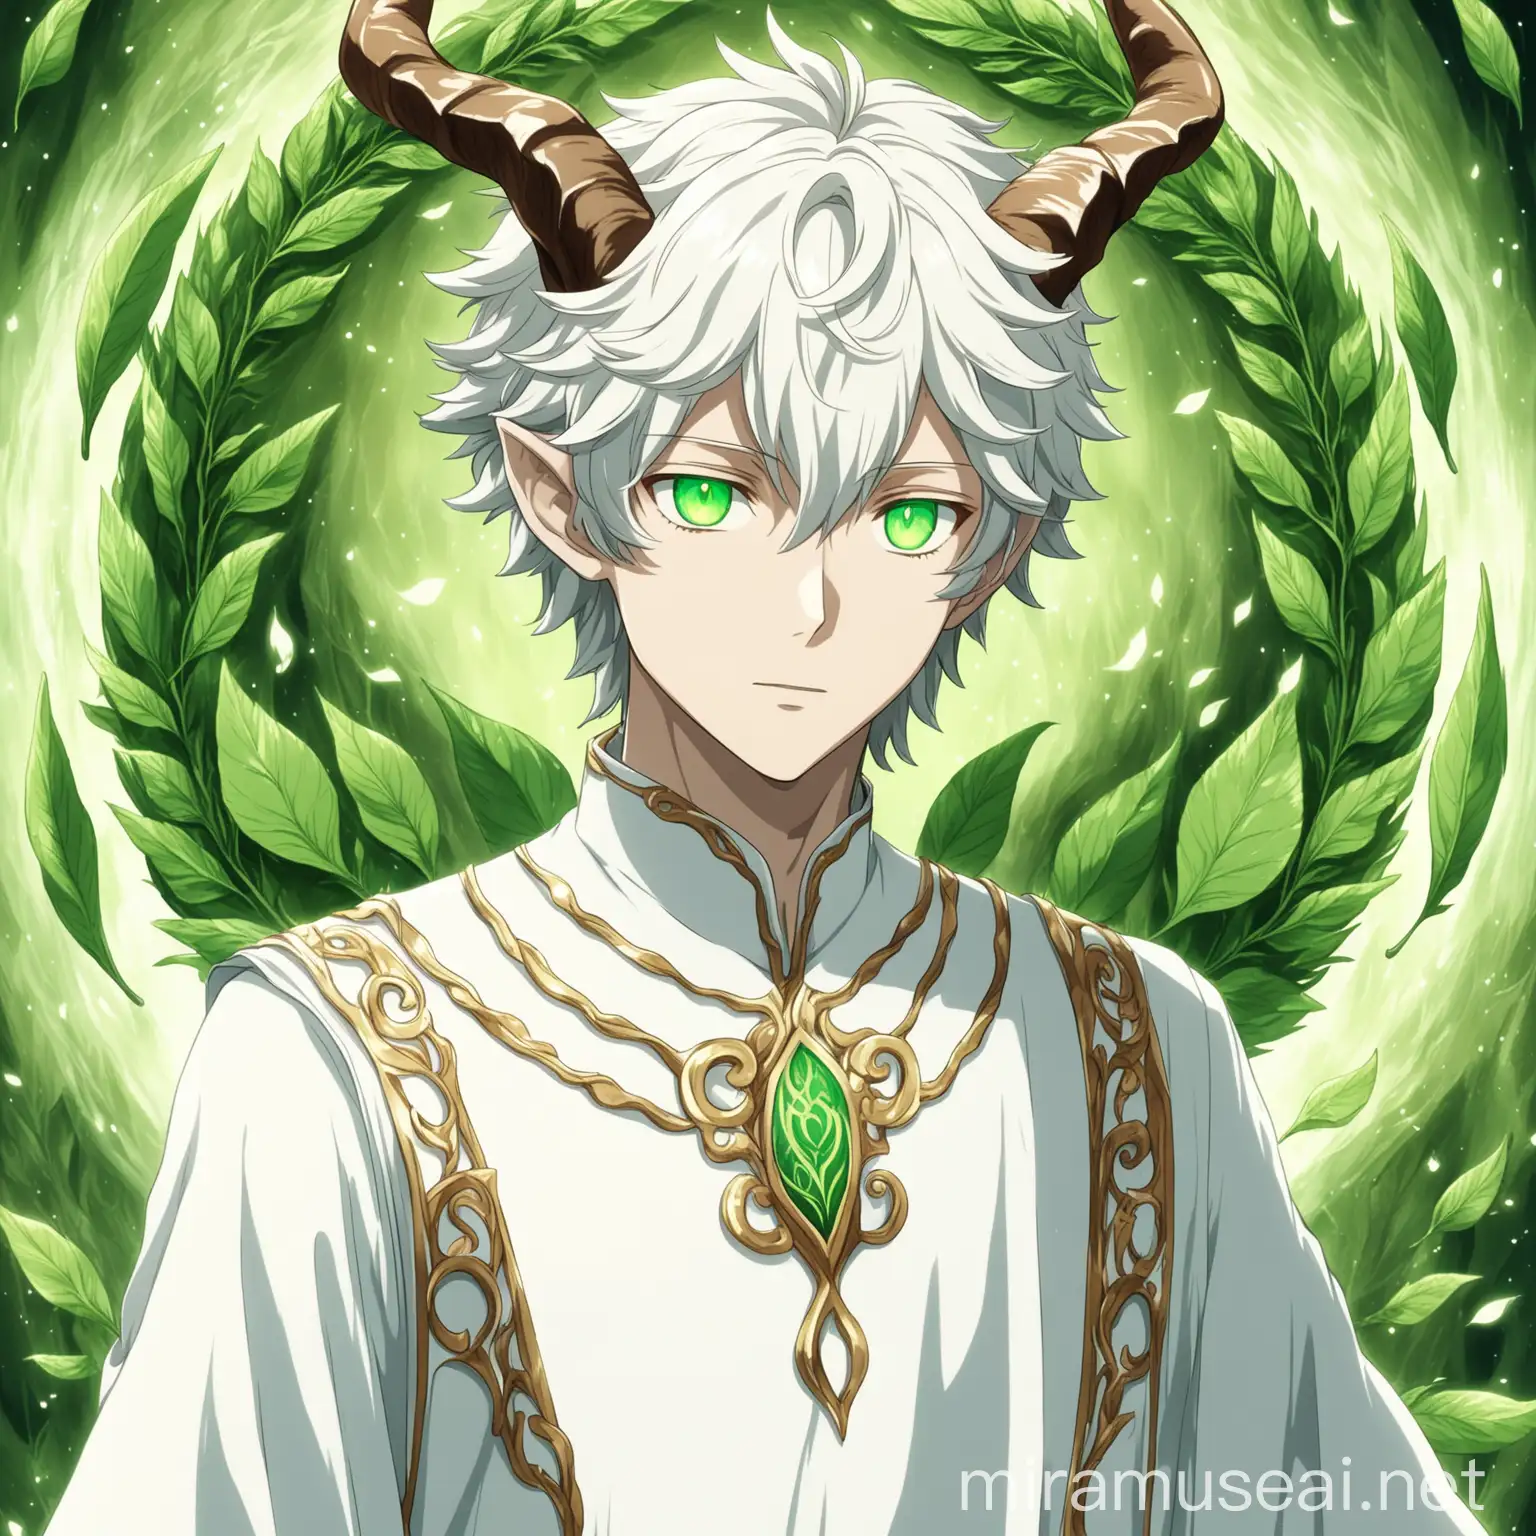 Anime Character Elegant FaunHorned Humanoid with Wolf Ears and LeafColored Eyes